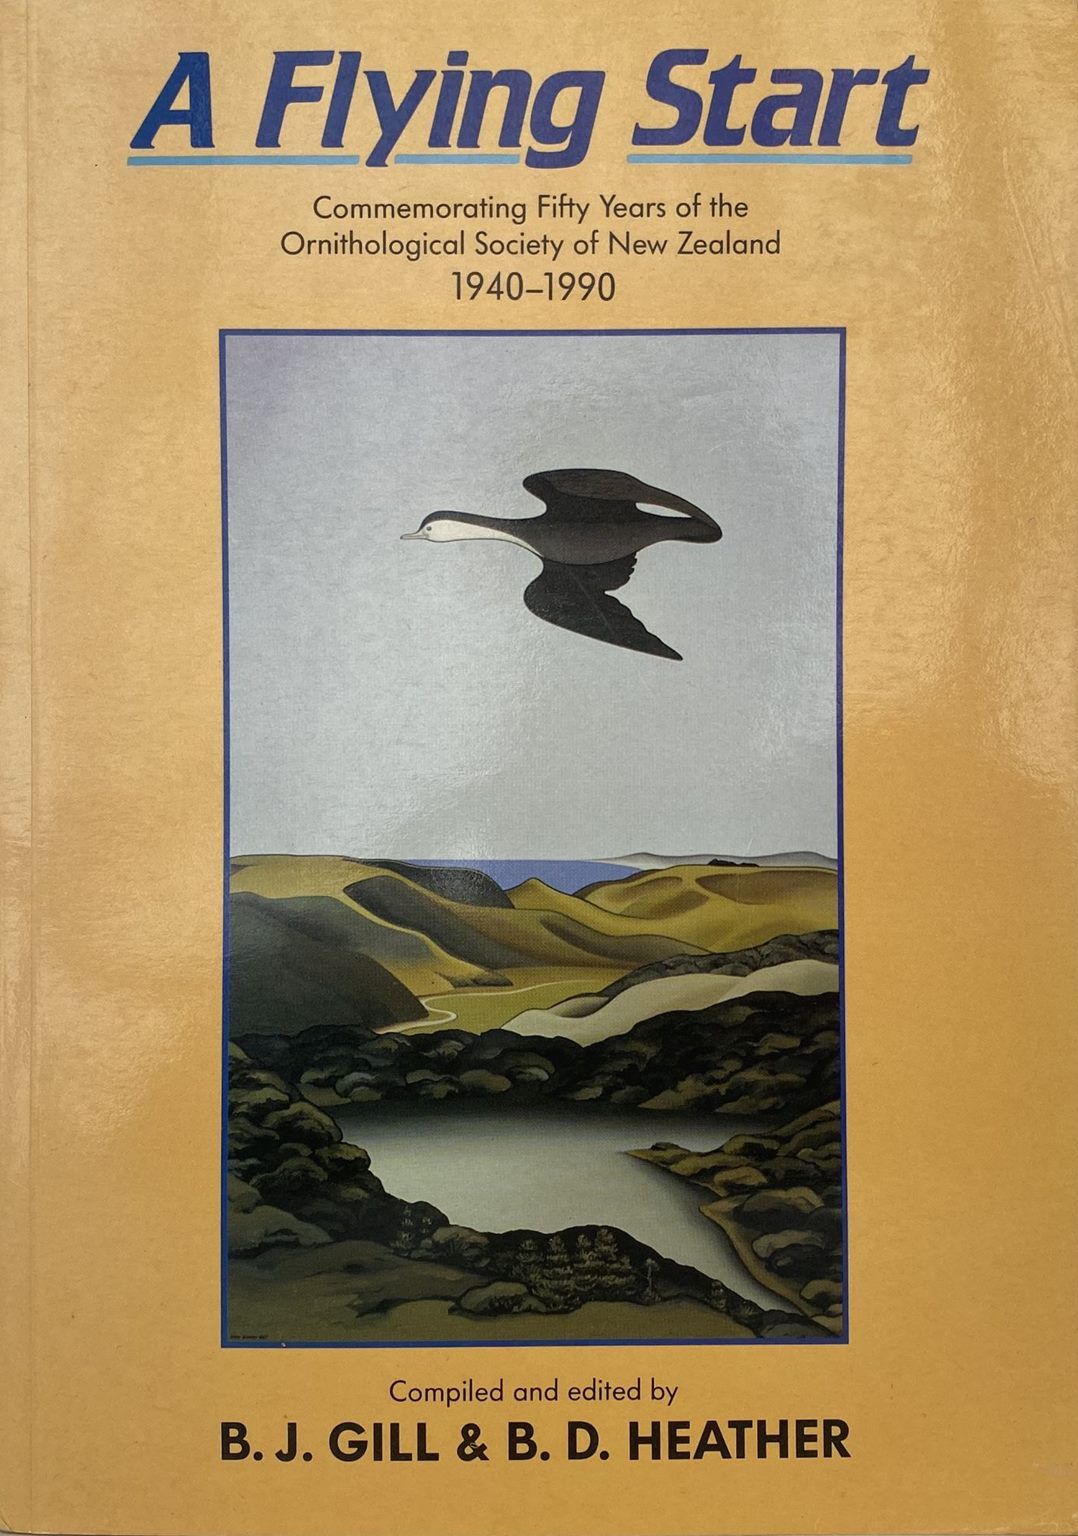 A FLYING START: 50 Years of the Ornithological Society of New Zealand 1940-1990